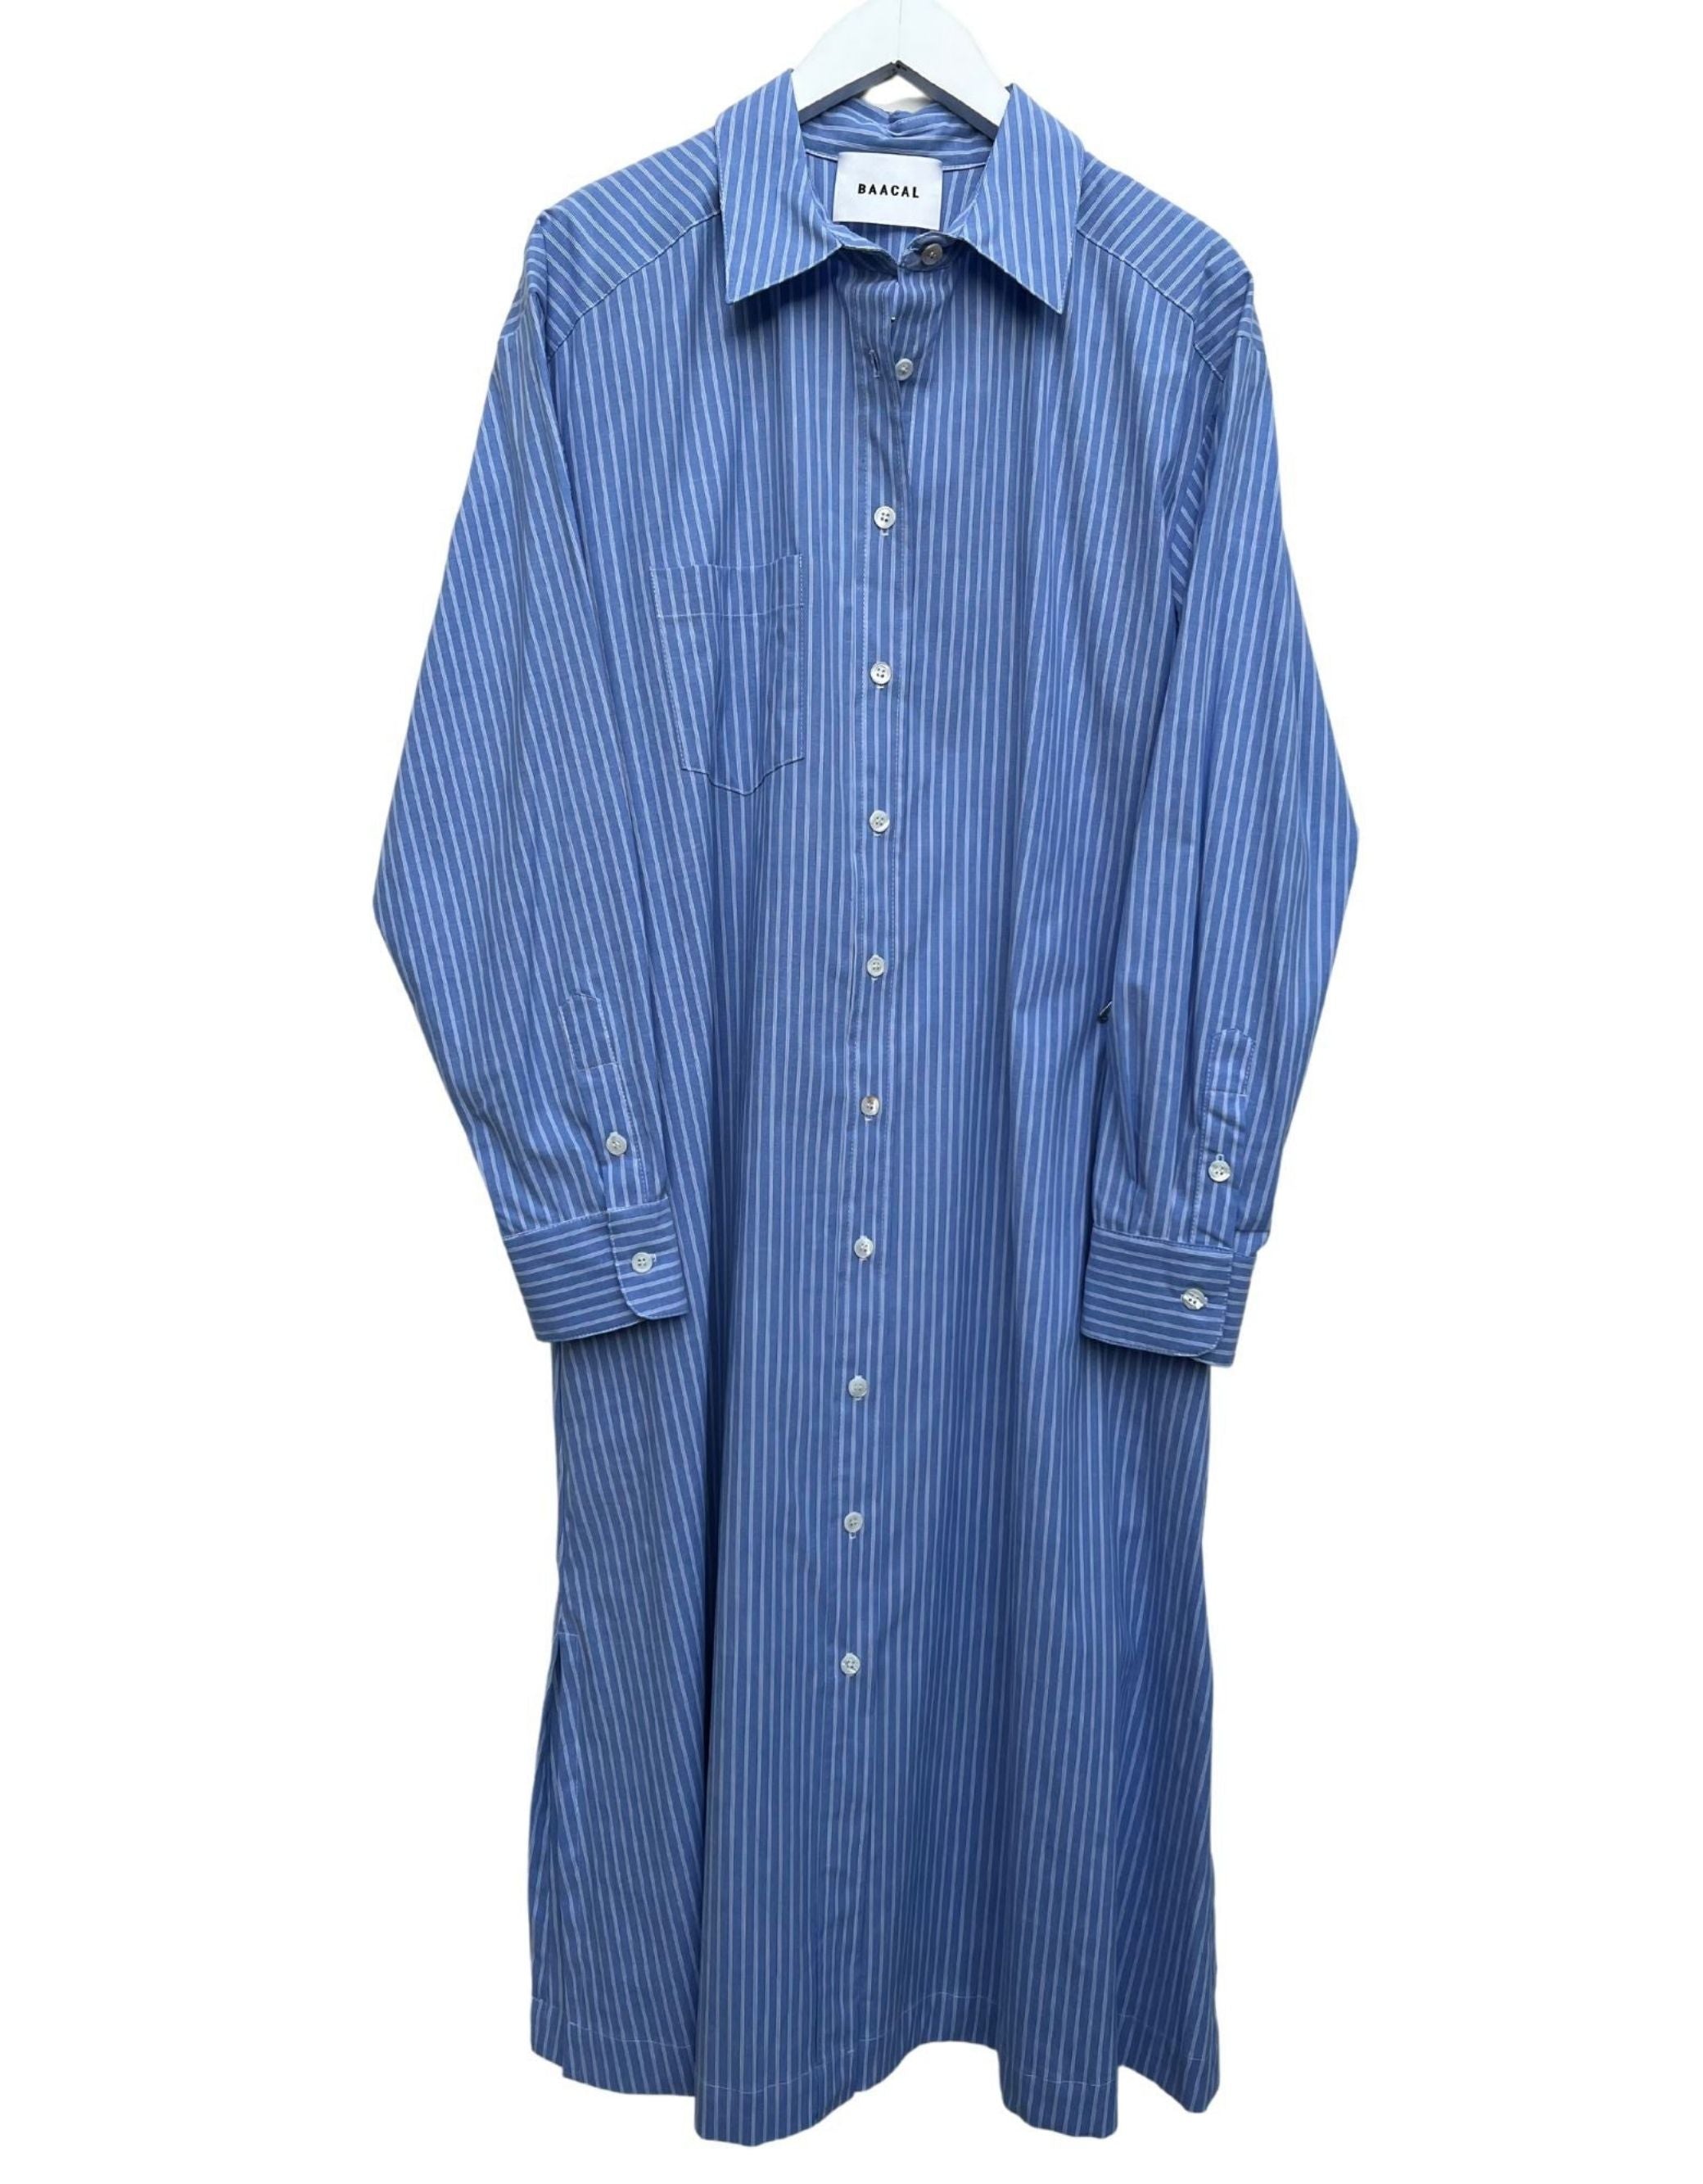 French Blue Double Pinstripe Cotton Shirtdress- Cynthia Vincent BAACAL –  Baacal